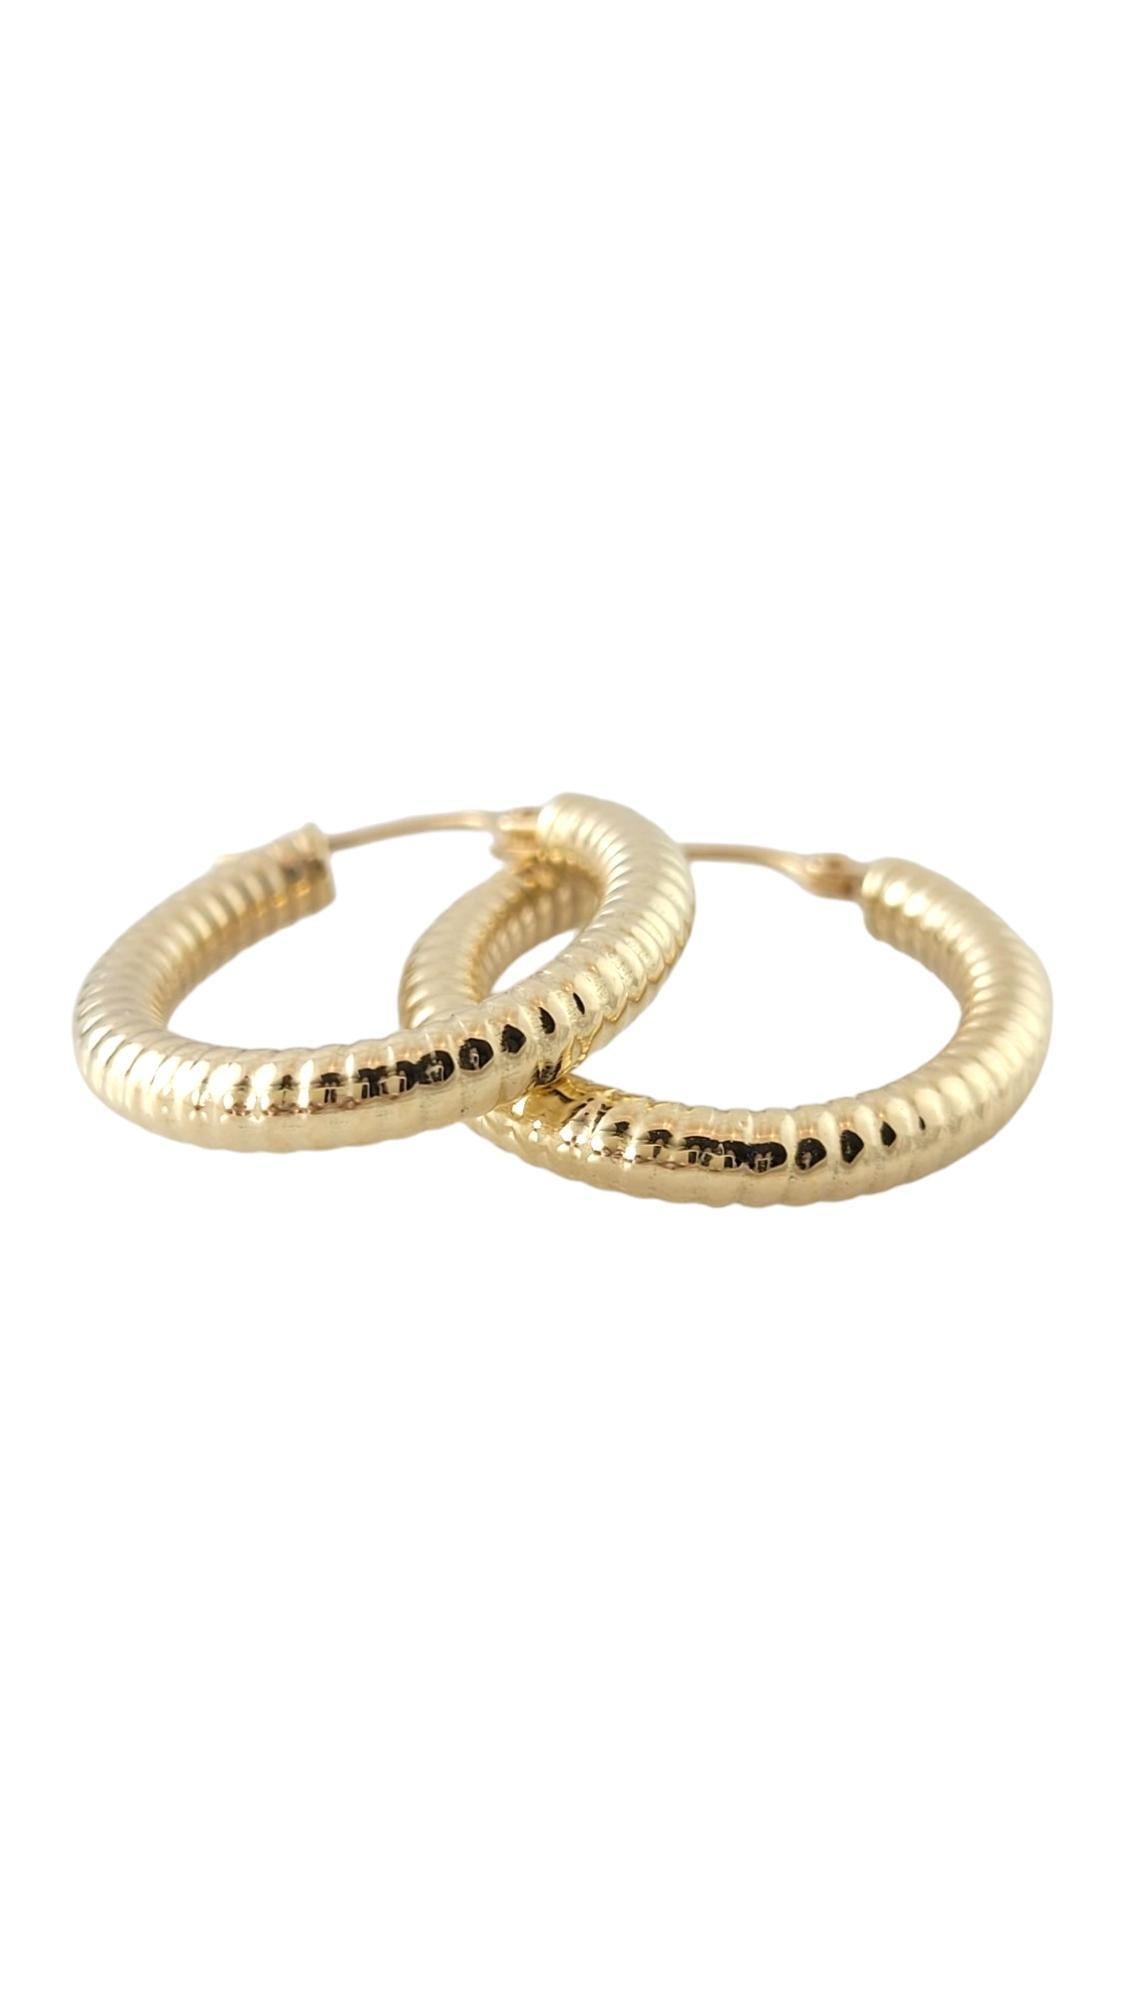 14K Yellow Gold Ribbed Hoop Earrings

This beautiful 14K yellow gold oval hoop earrings will look stunning on anyone!

Size: 23.3mm X 3.0mm X 3.1mm

Weight: 0.9 dwt/ 1.4 g

Hallmark: 14K Italy AND

Very good condition, professionally polished.

Will